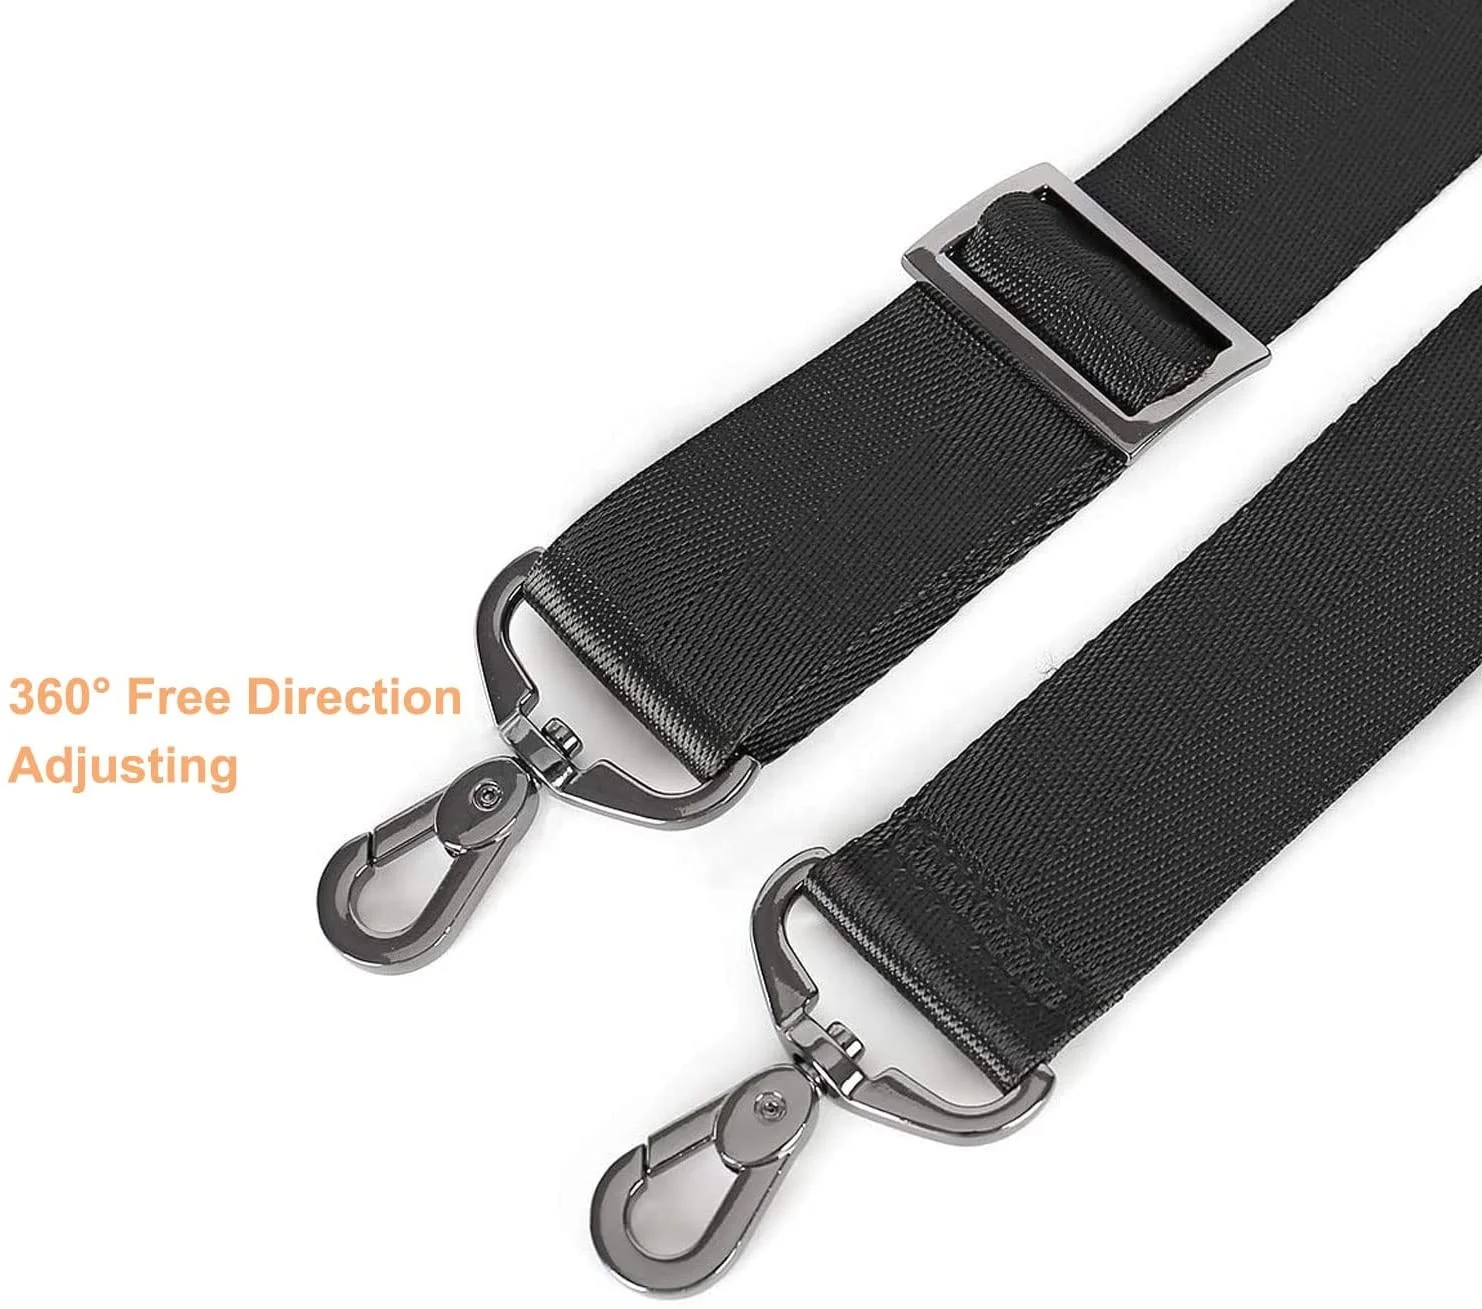 Adjustable Comfortable Universal Replacement Laptop Luggage Duffel Bag Shoulder Strap with Metal Hook